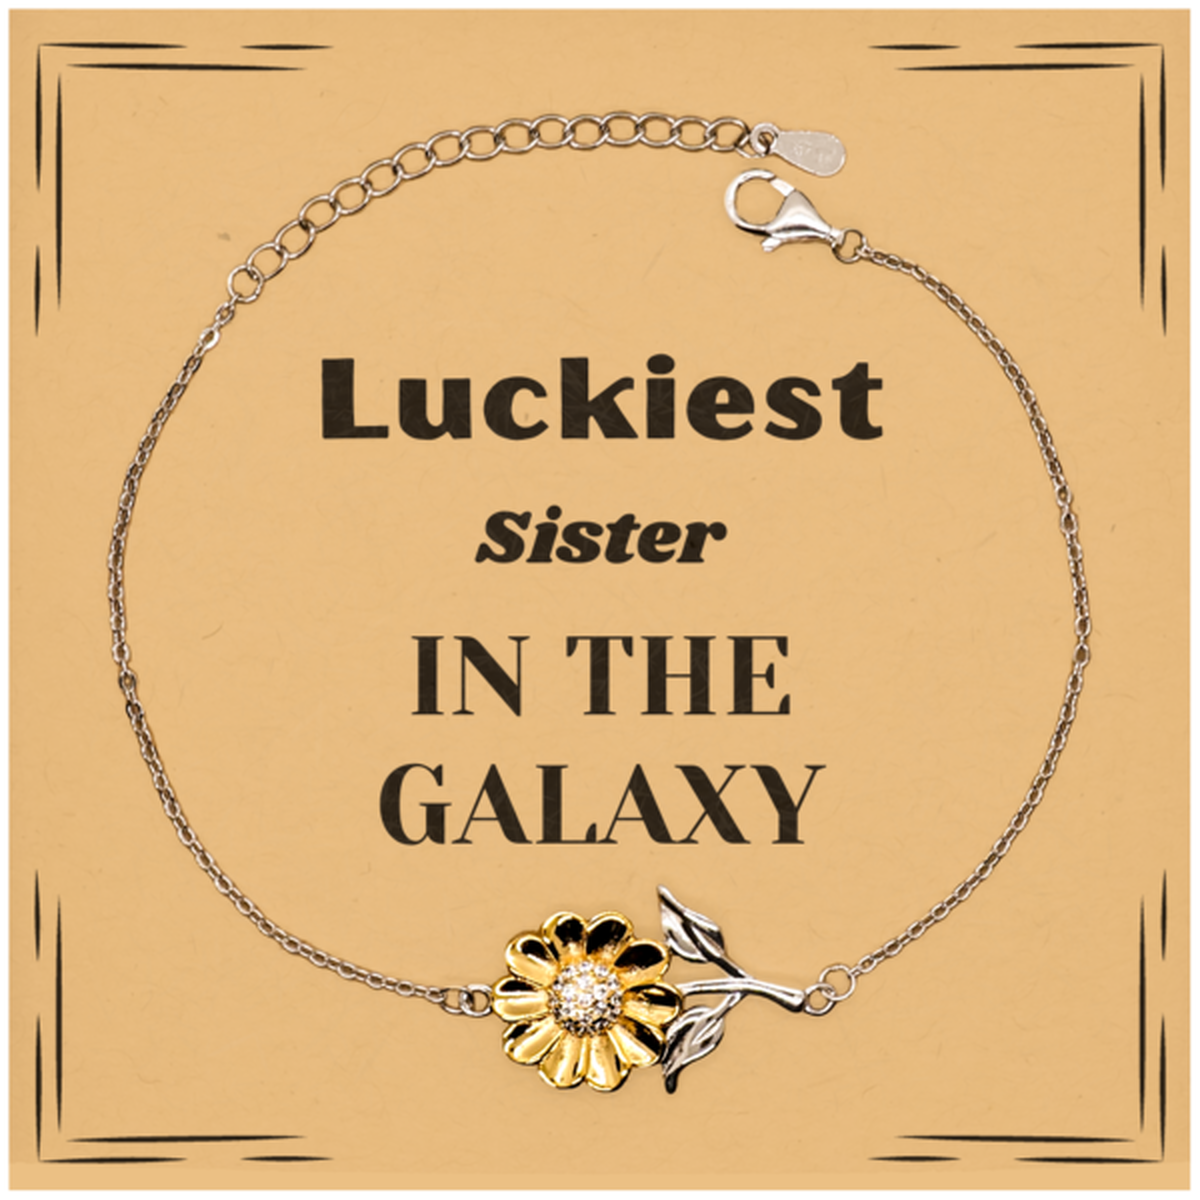 Luckiest Sister in the Galaxy, To My Sister Message Card Gifts, Christmas Sister Sunflower Bracelet Gifts, X-mas Birthday Unique Gifts For Sister Men Women